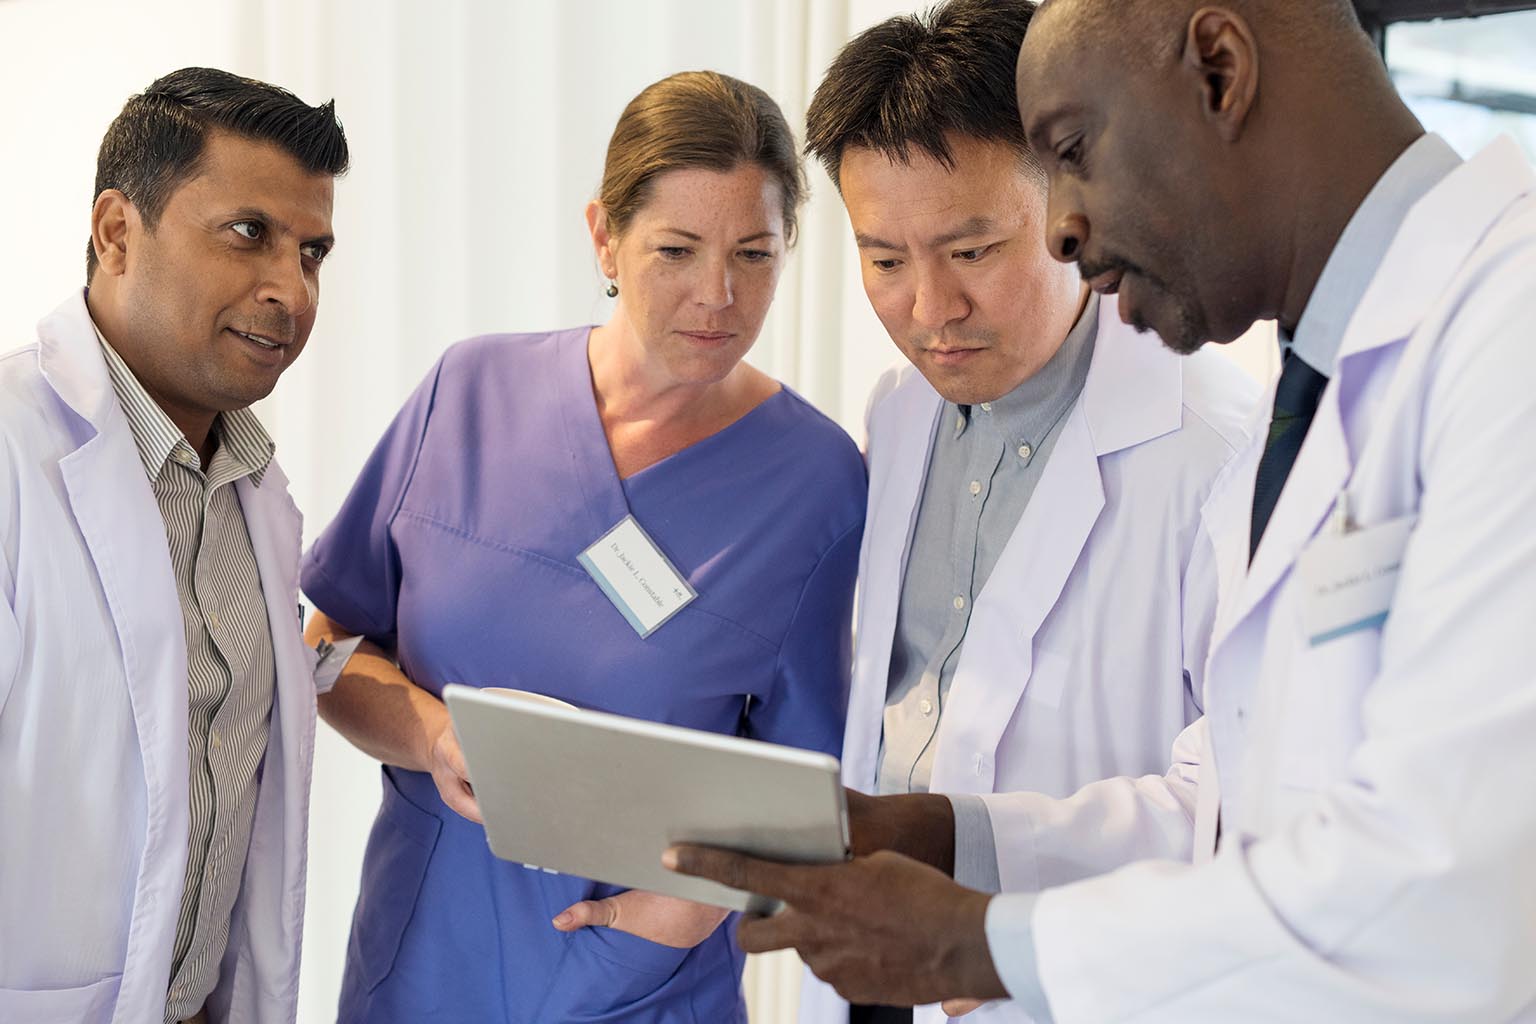 group of doctors looking at tablet